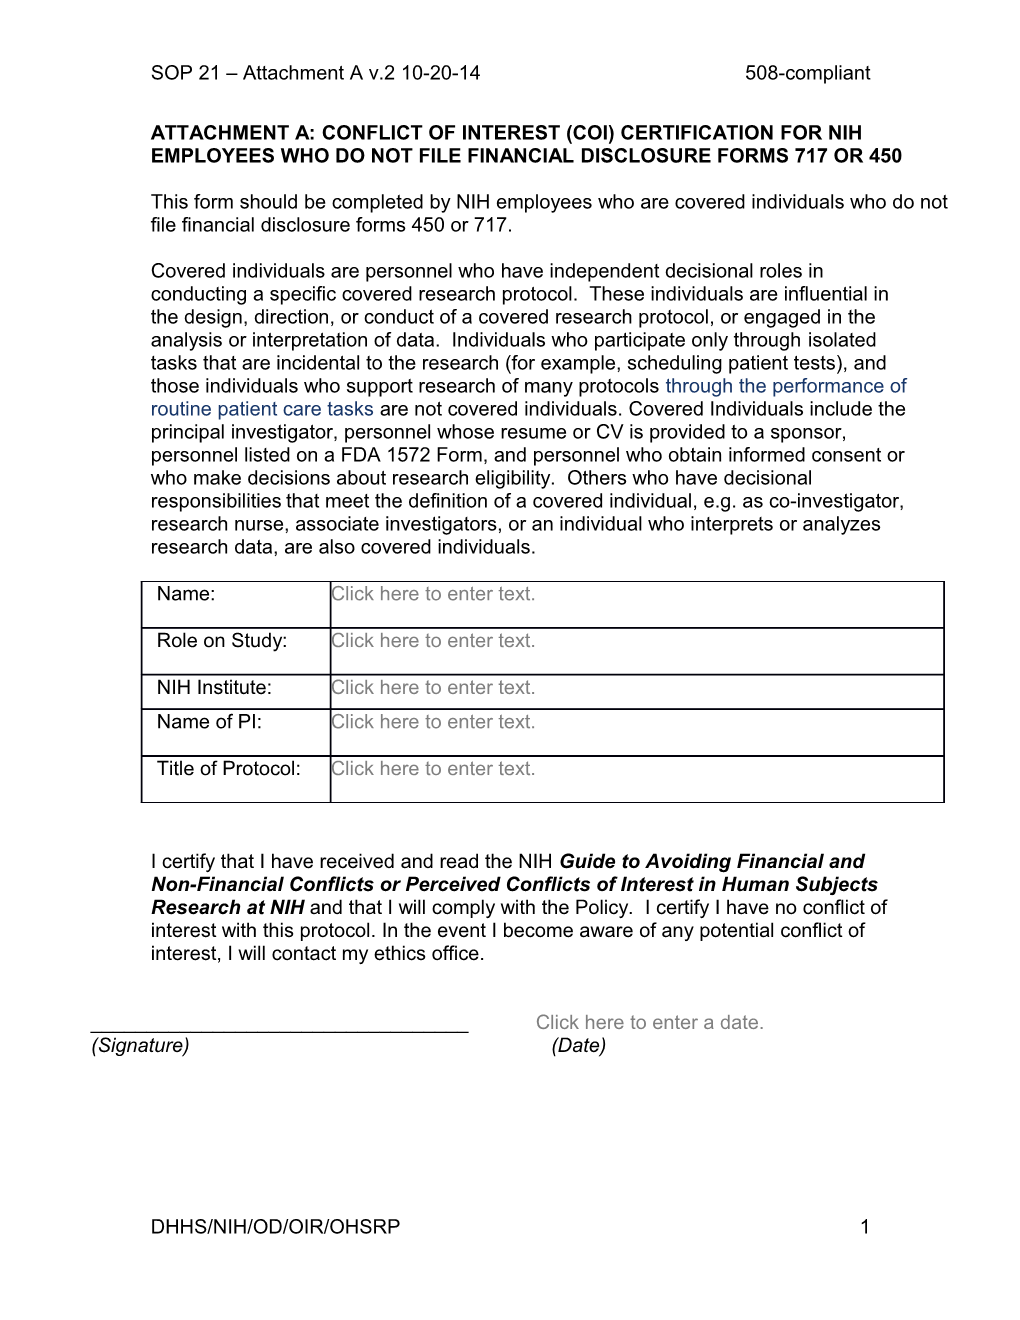 Conflict of Interest Disclosure Form for Protocol Specific Clinical Research